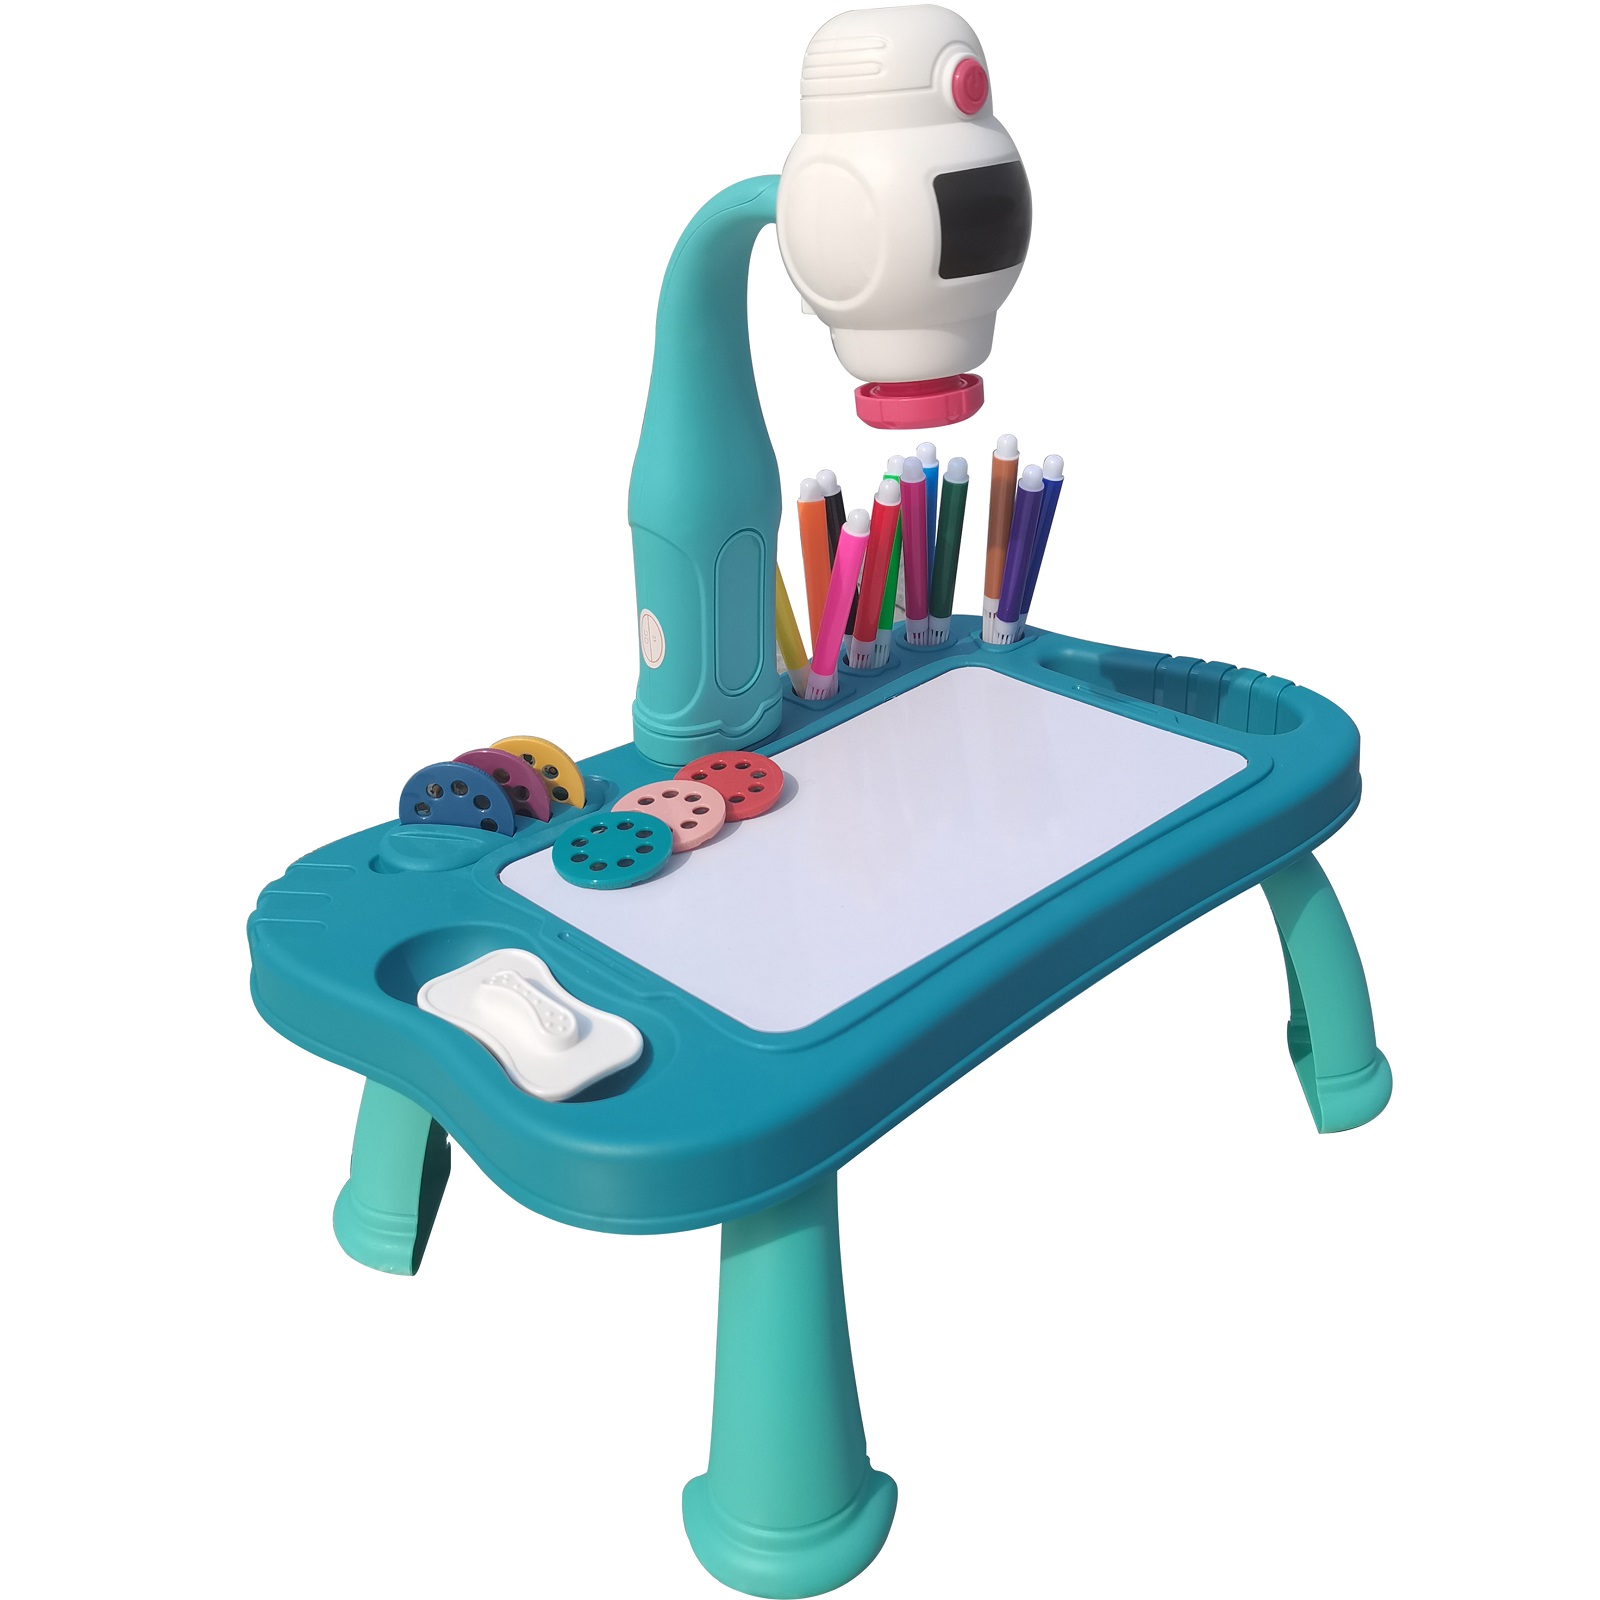 KIDS DRAWING PROJECTOR Table - Children Trace and Draw Projector